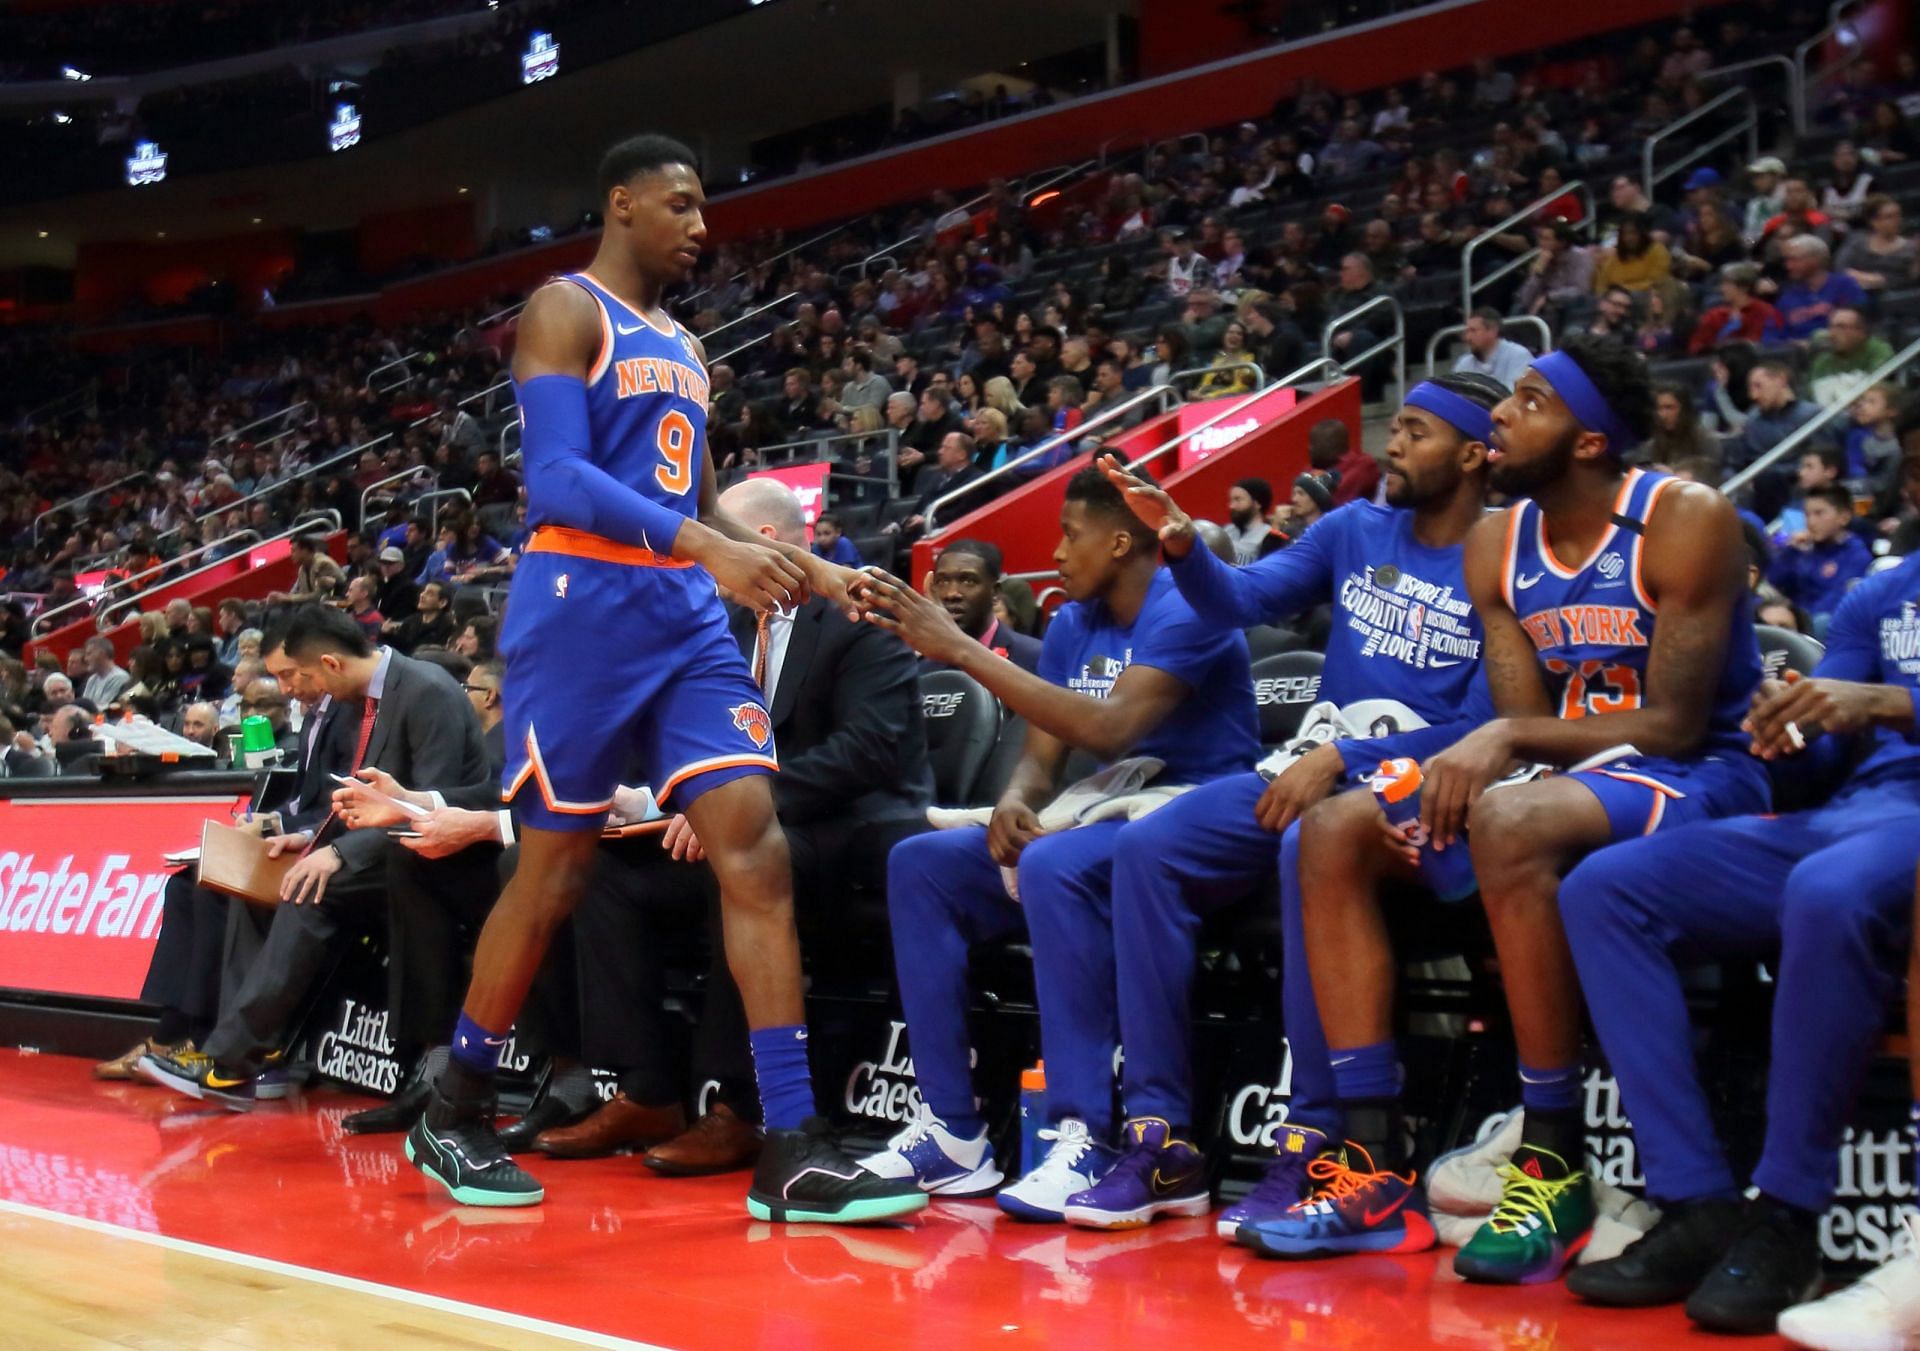 The New York Knicks need to consistently play with more effort and determination to turn their season around. [Photo: Daily Knicks]